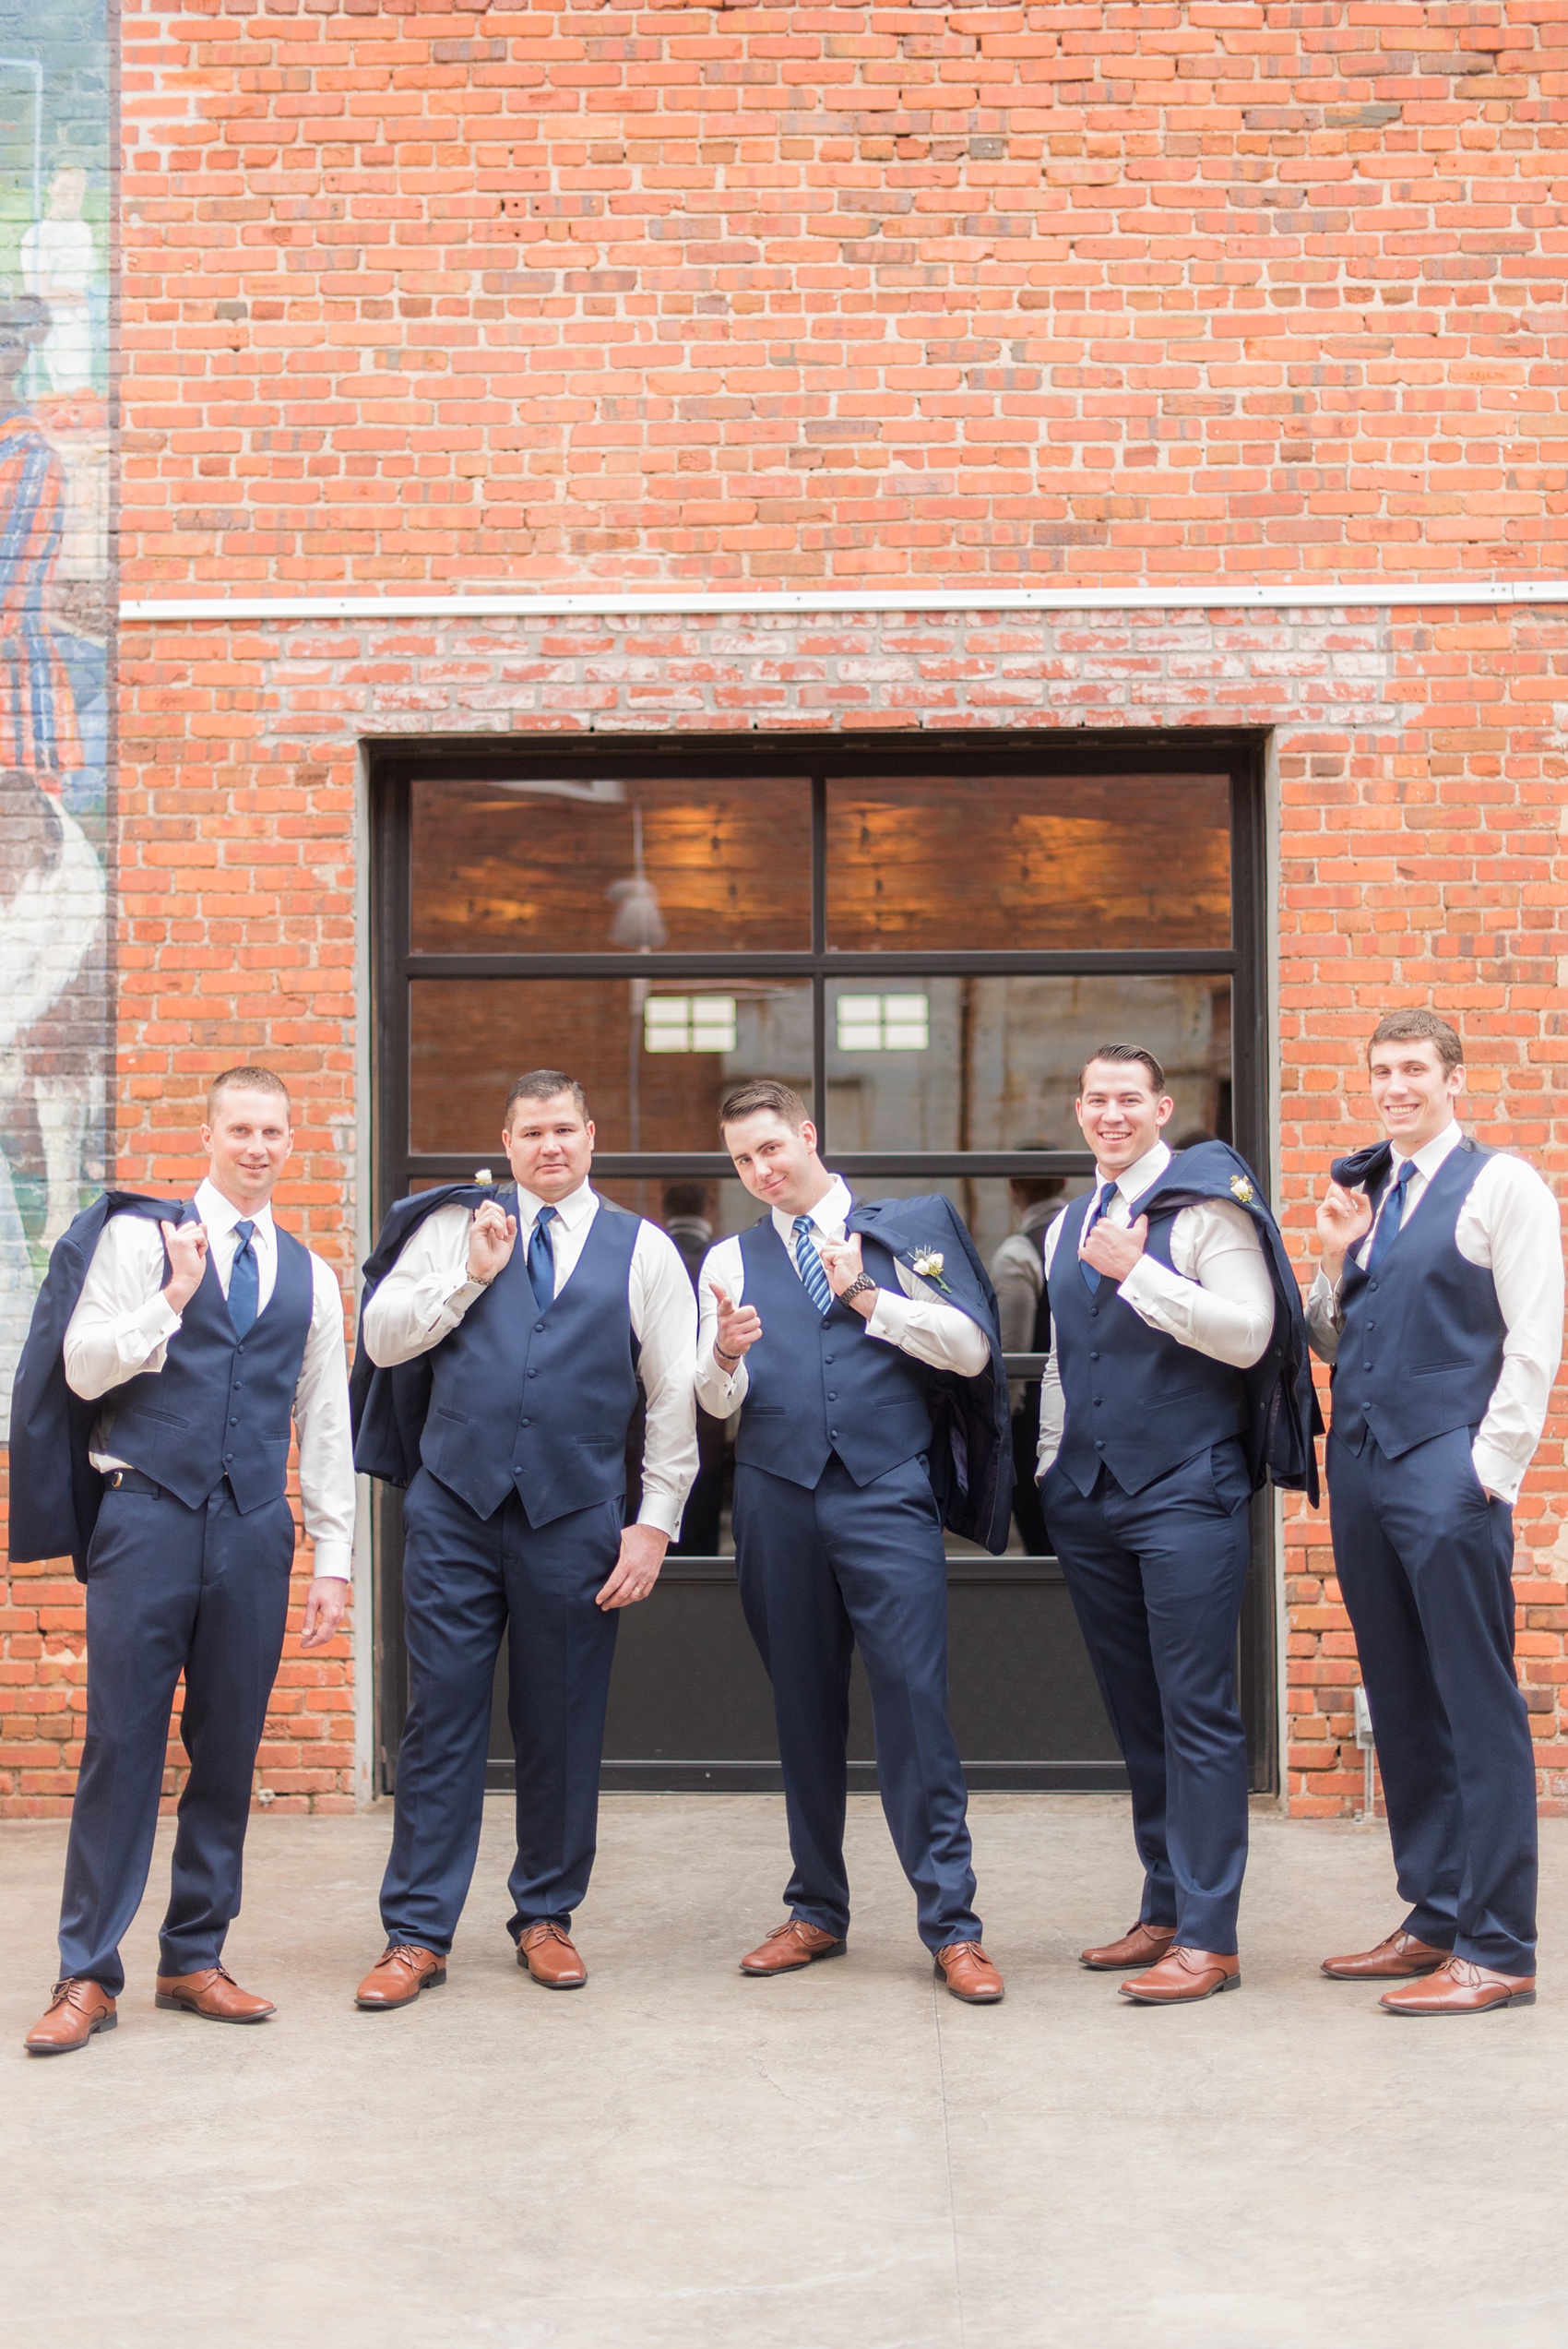 Durham wedding photos at The Cookery by Mikkel Paige Photography in North Carolina. The groomsmen wore navy blue suits with ties and brown shoes.